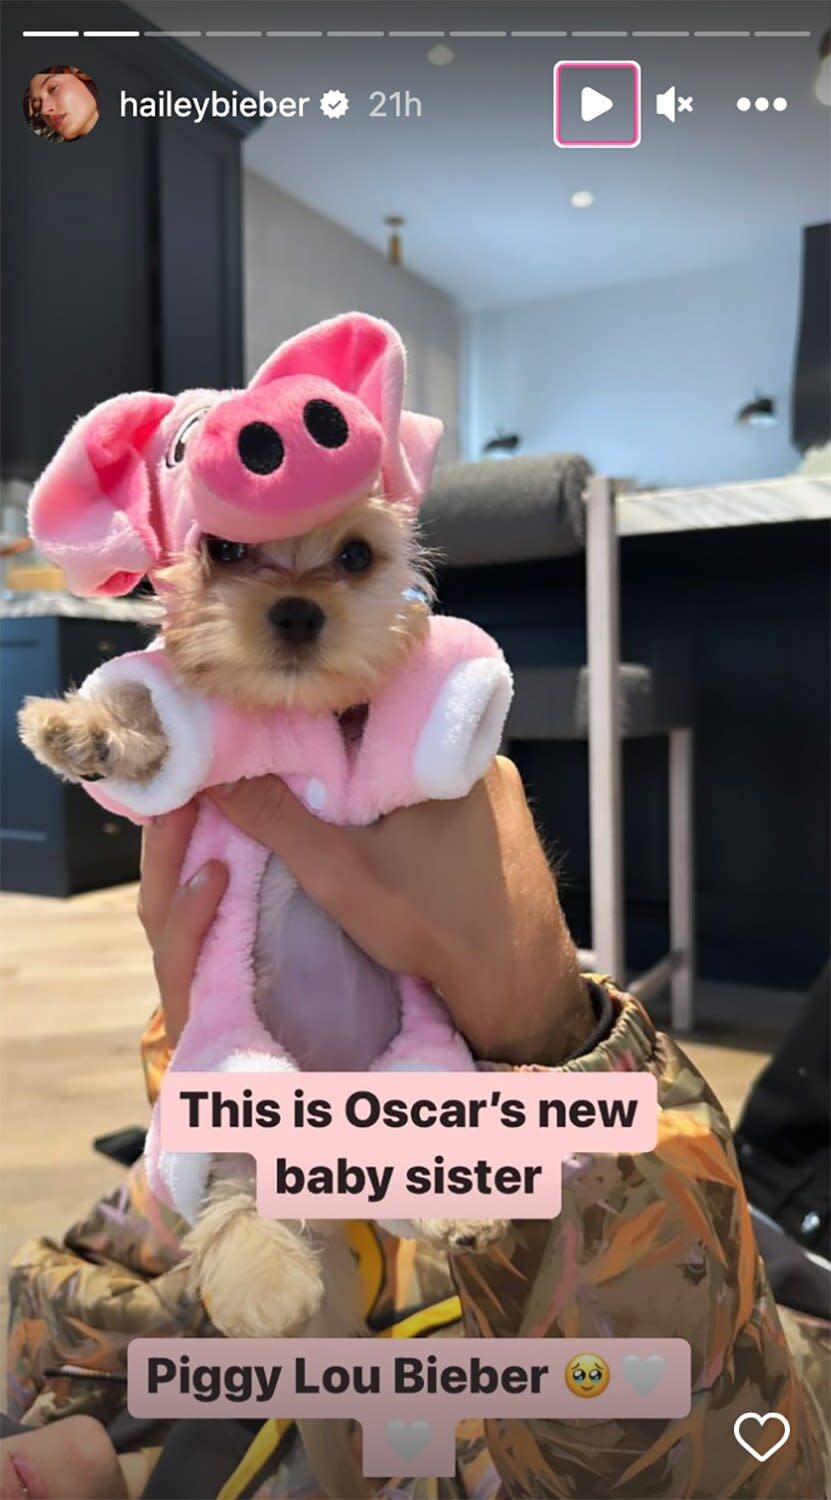 https://www.instagram.com/p/CkZyML4rgHs/ hed: Justin Bieber and Wife Hailey Adopt New Puppy Piggy Lou: 'Oscar's New Baby Sister'